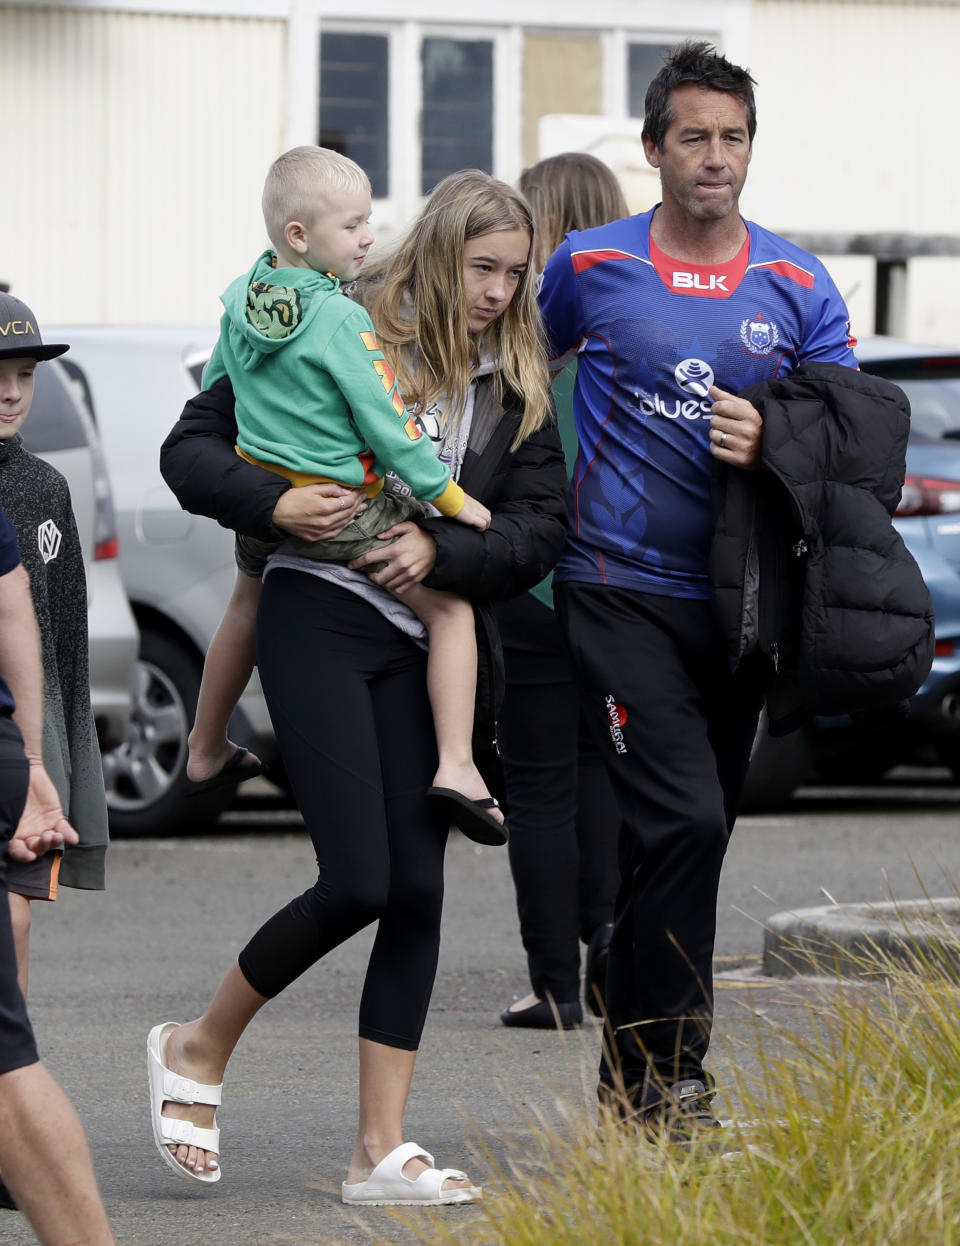 Mark Inman, right, brother of volcano victim Hayden Marshall-Inman, walks with family members after arriving back to the Whakatane wharf following a blessing at sea ahead of the recovery operation off the coast of Whakatane New Zealand, Friday, Dec. 13, 2019. A team of eight New Zealand military specialists landed on White Island early Friday to retrieve the bodies of victims after the Dec. 9 eruption. (AP Photo/Mark Baker)